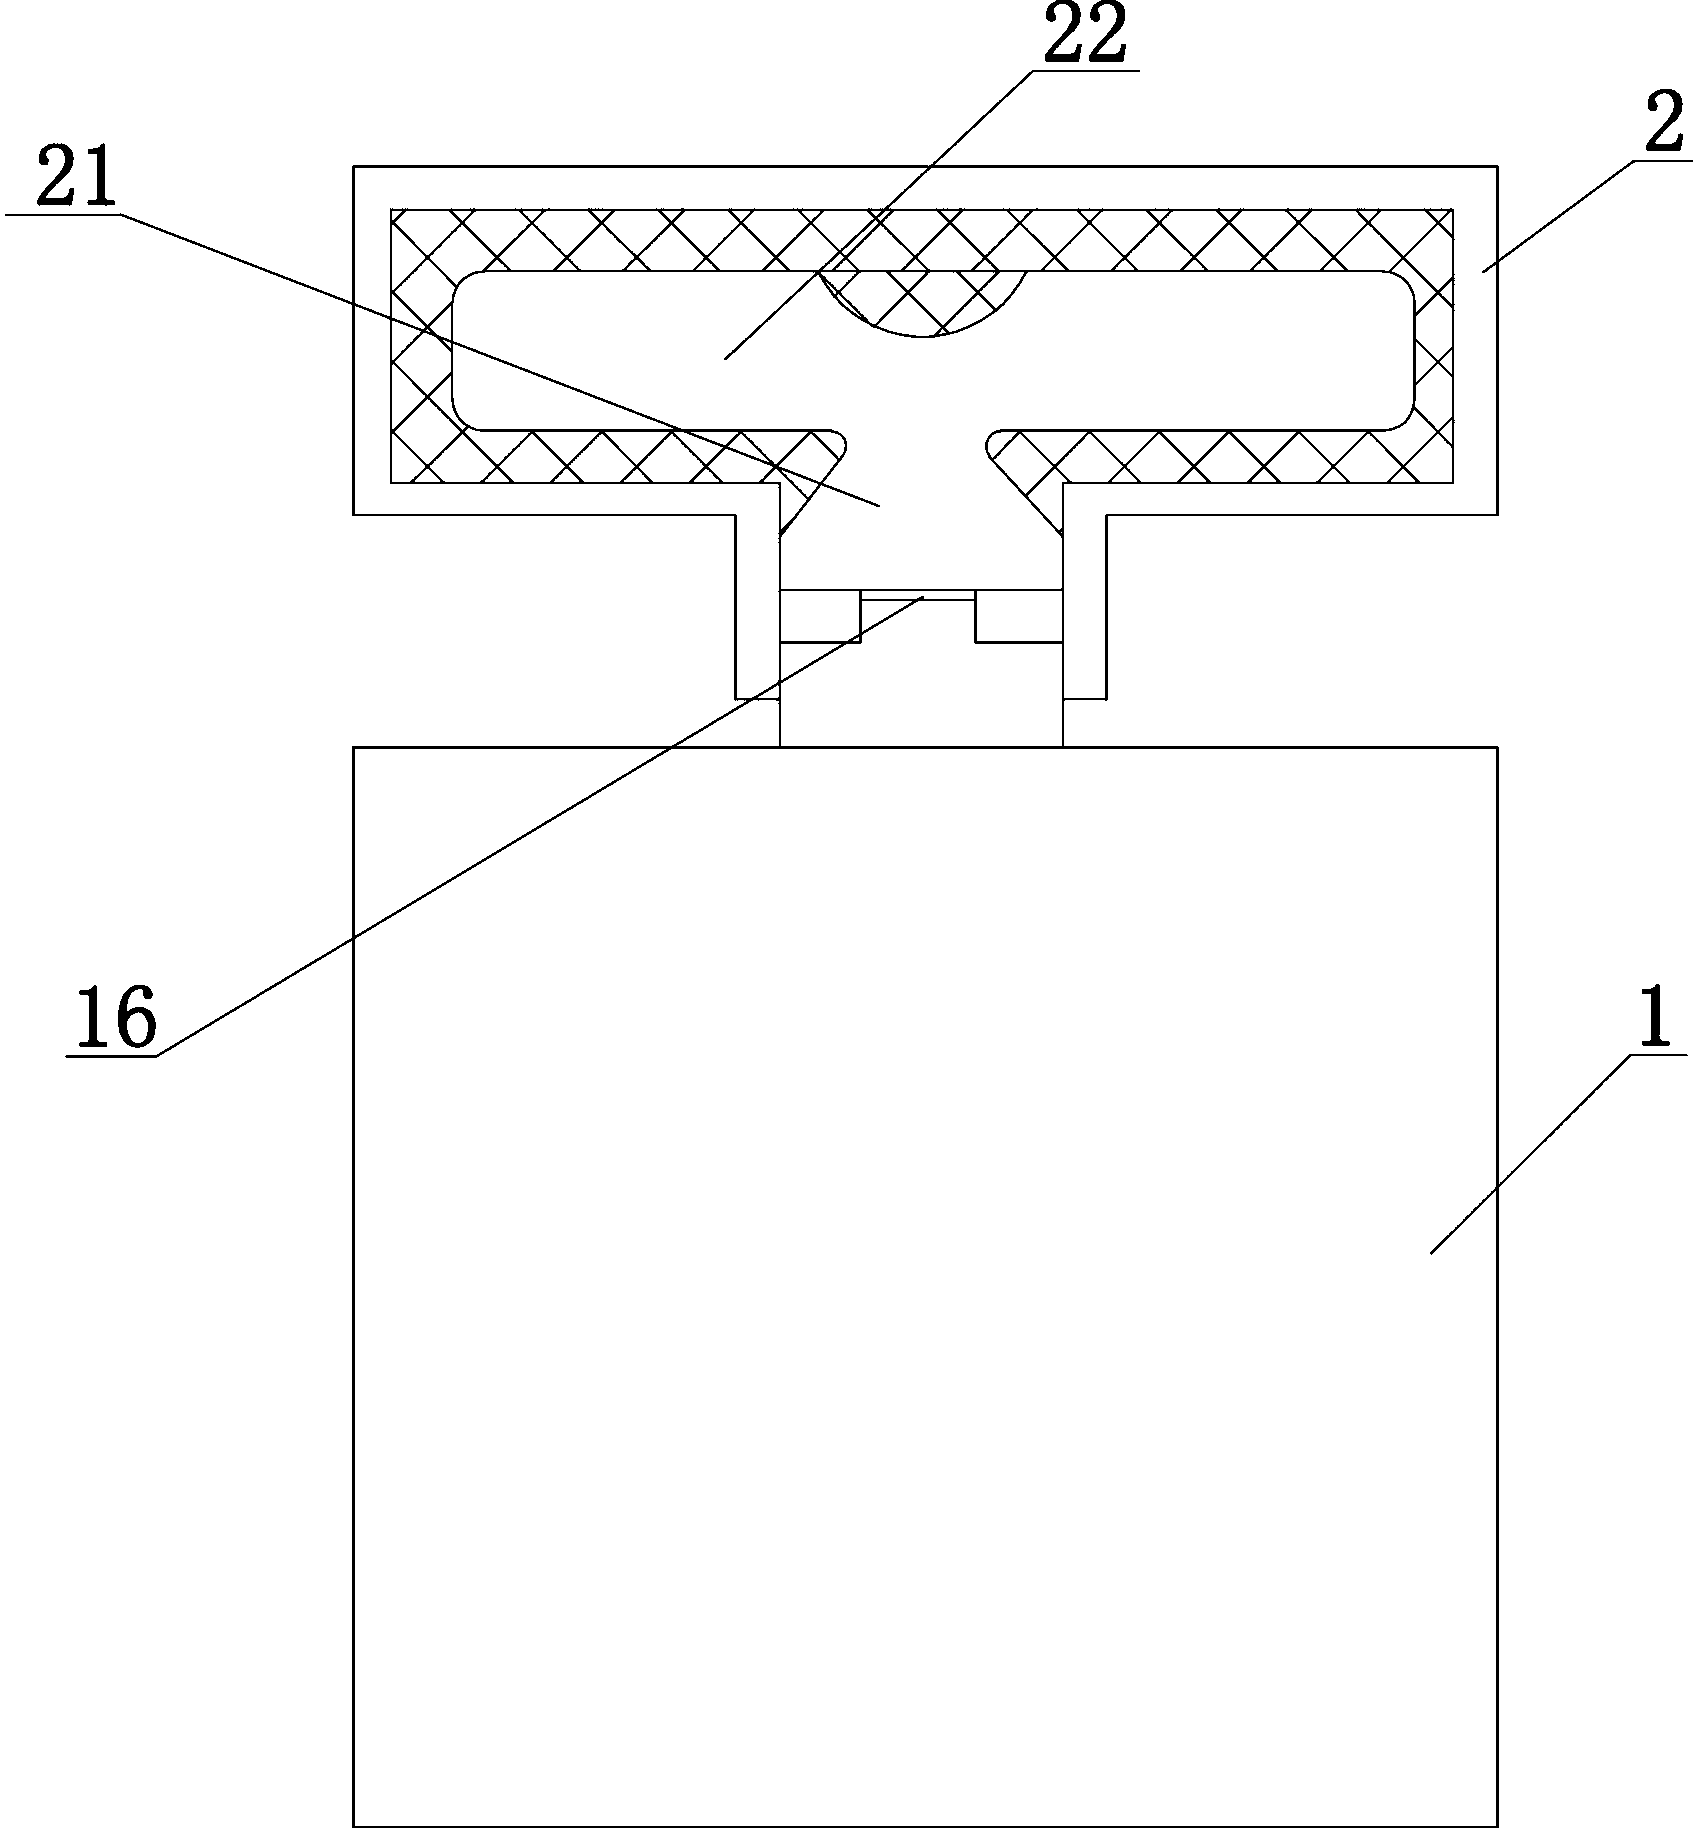 Safe absorbing device for lithium-ion battery